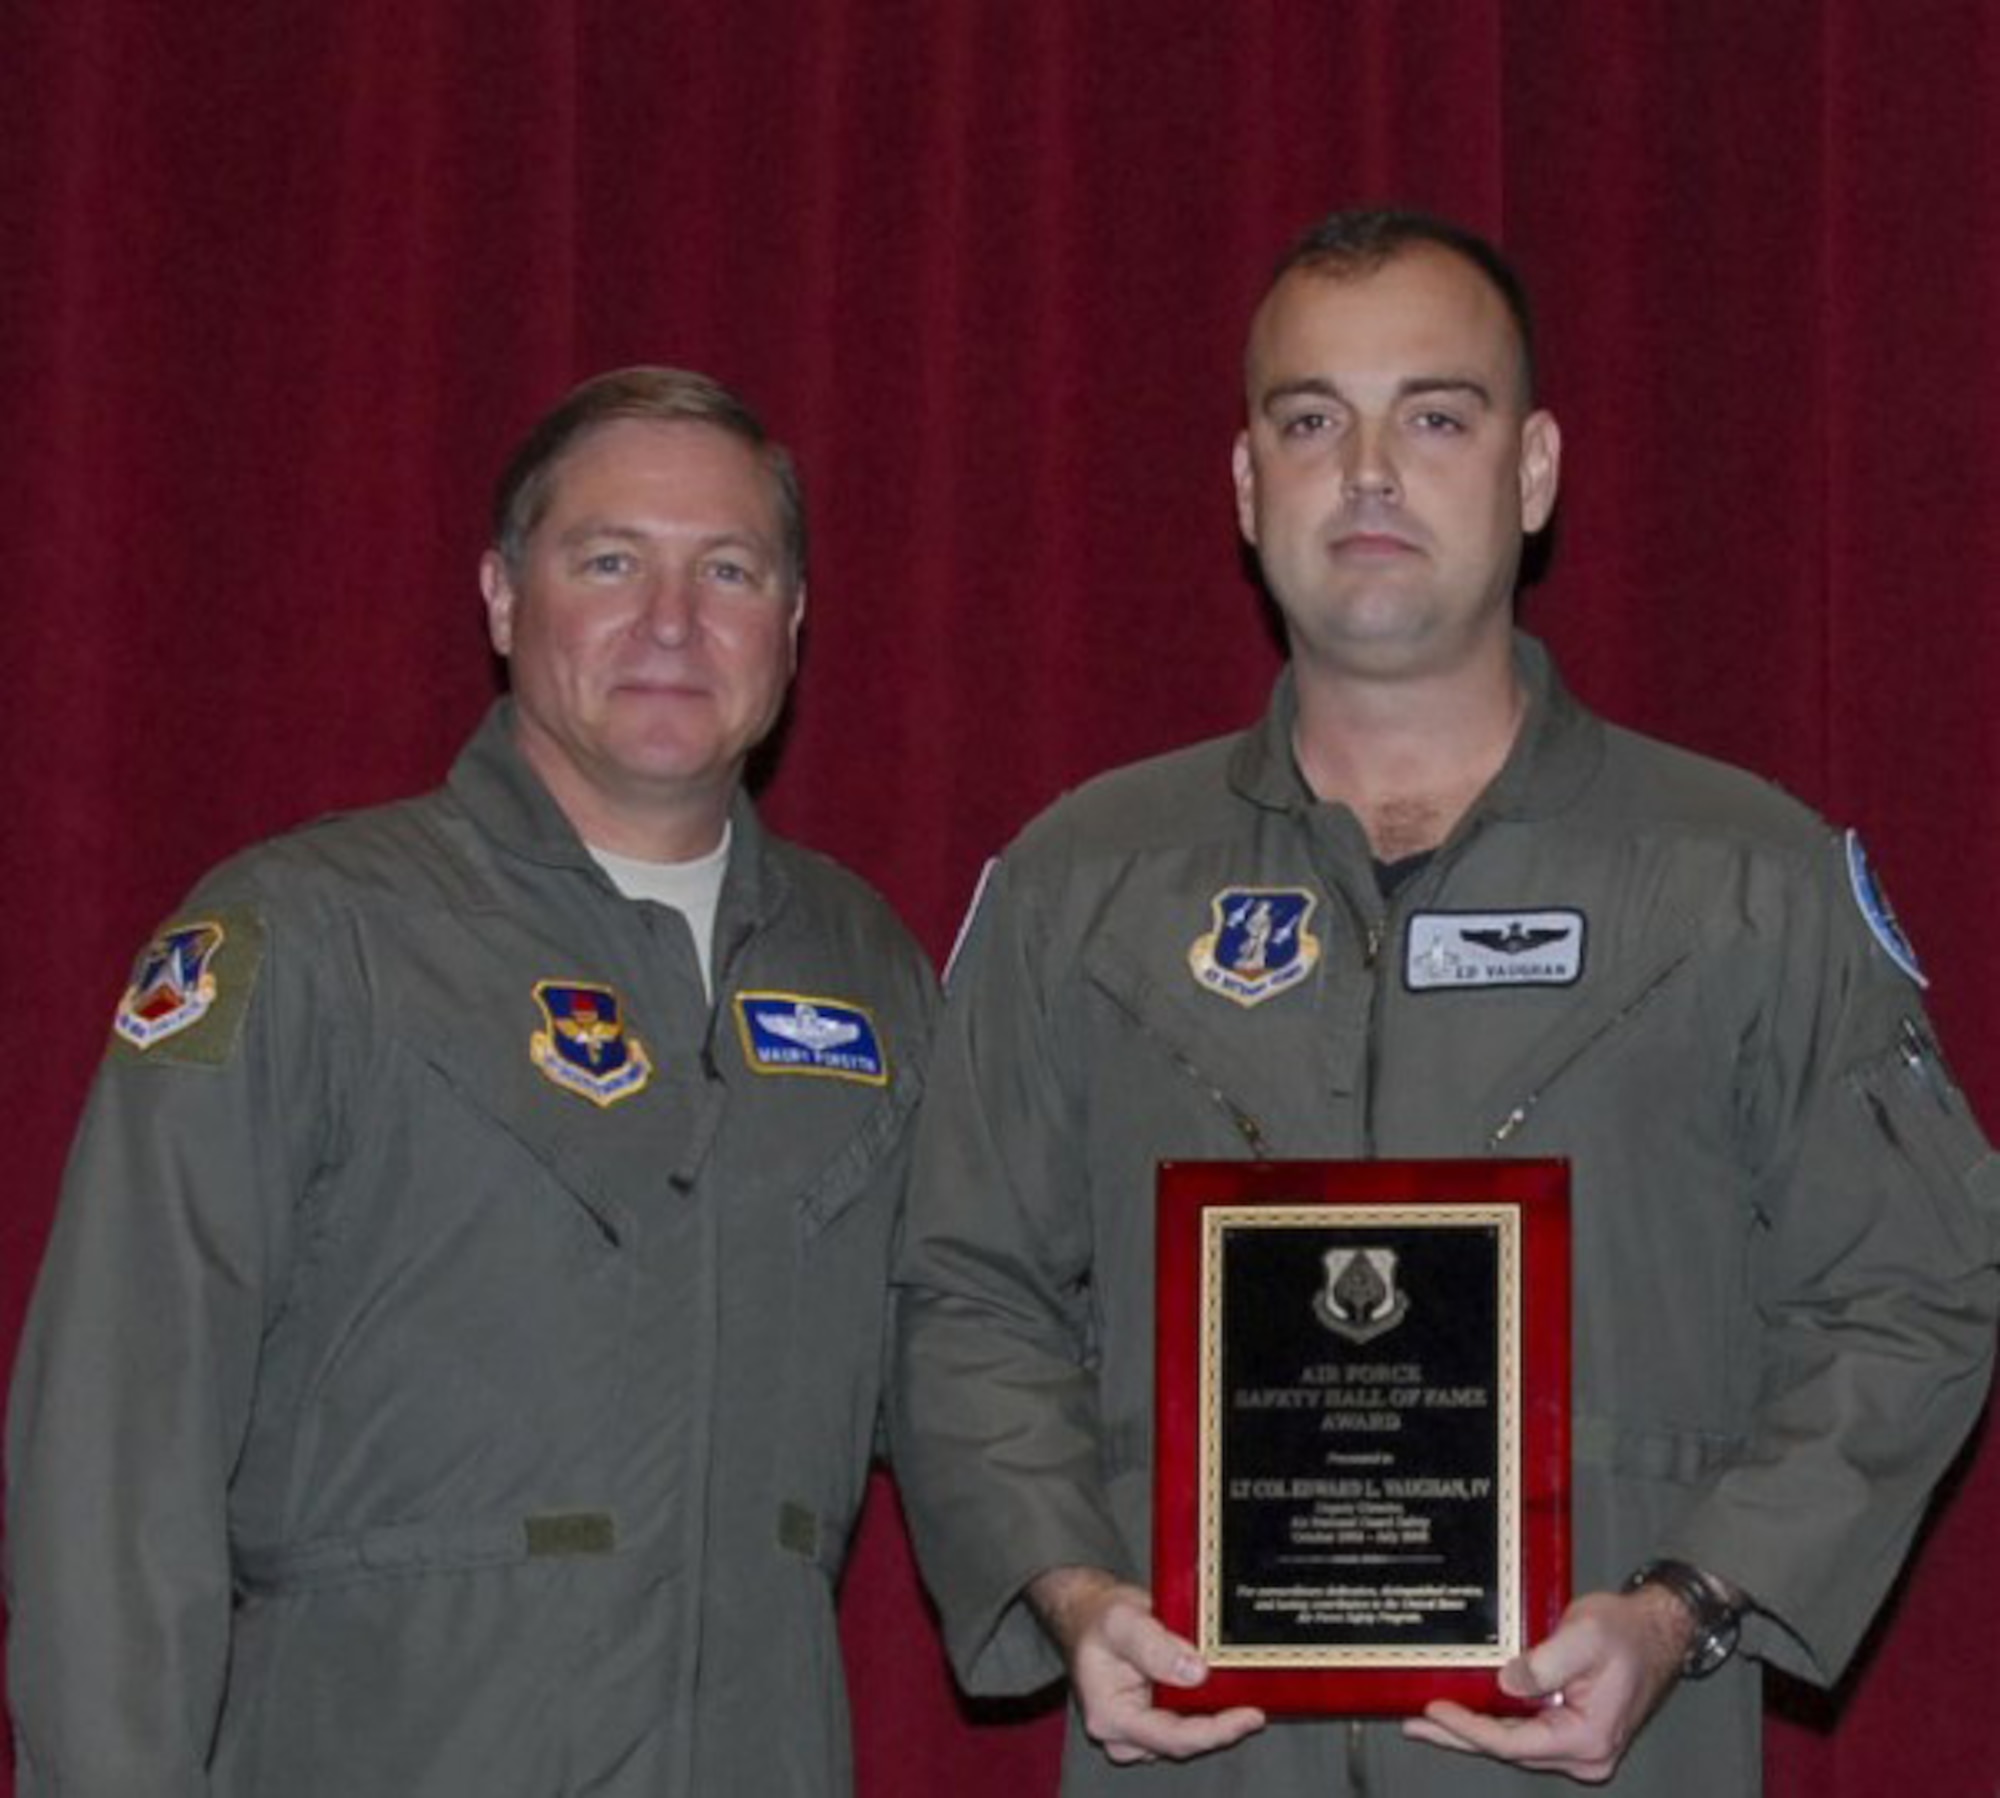 Presentation of Air Force Safety Hall of Fame Award to Lt Col Ed Vaughn by Col Marcus Quint, AF Safety Center

Location: Bldg 1401, AWC
Date: 6 Feb 2009